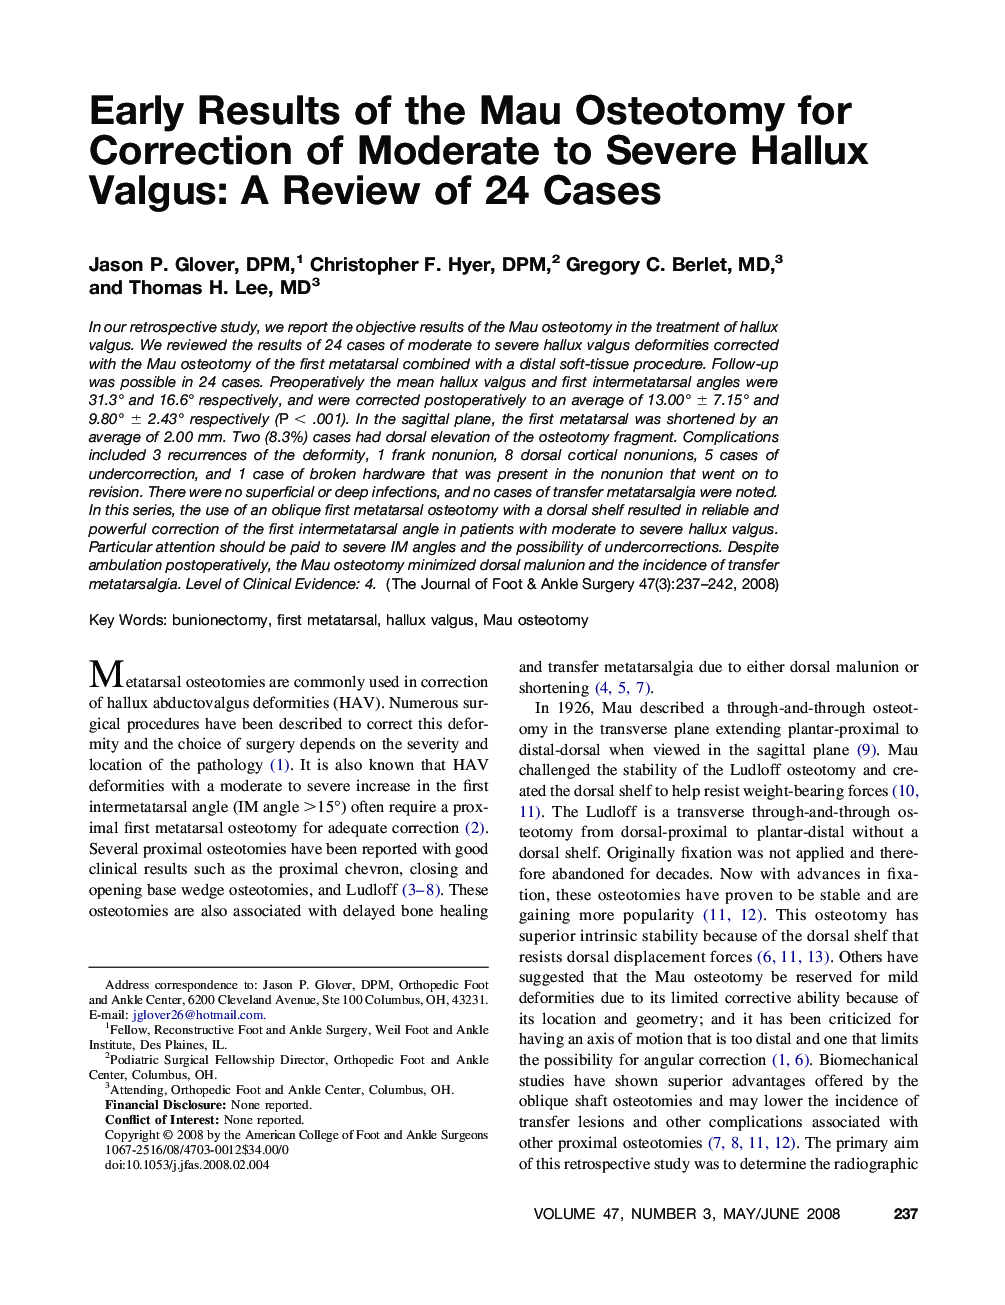 Early Results of the Mau Osteotomy for Correction of Moderate to Severe Hallux Valgus: A Review of 24 Cases 